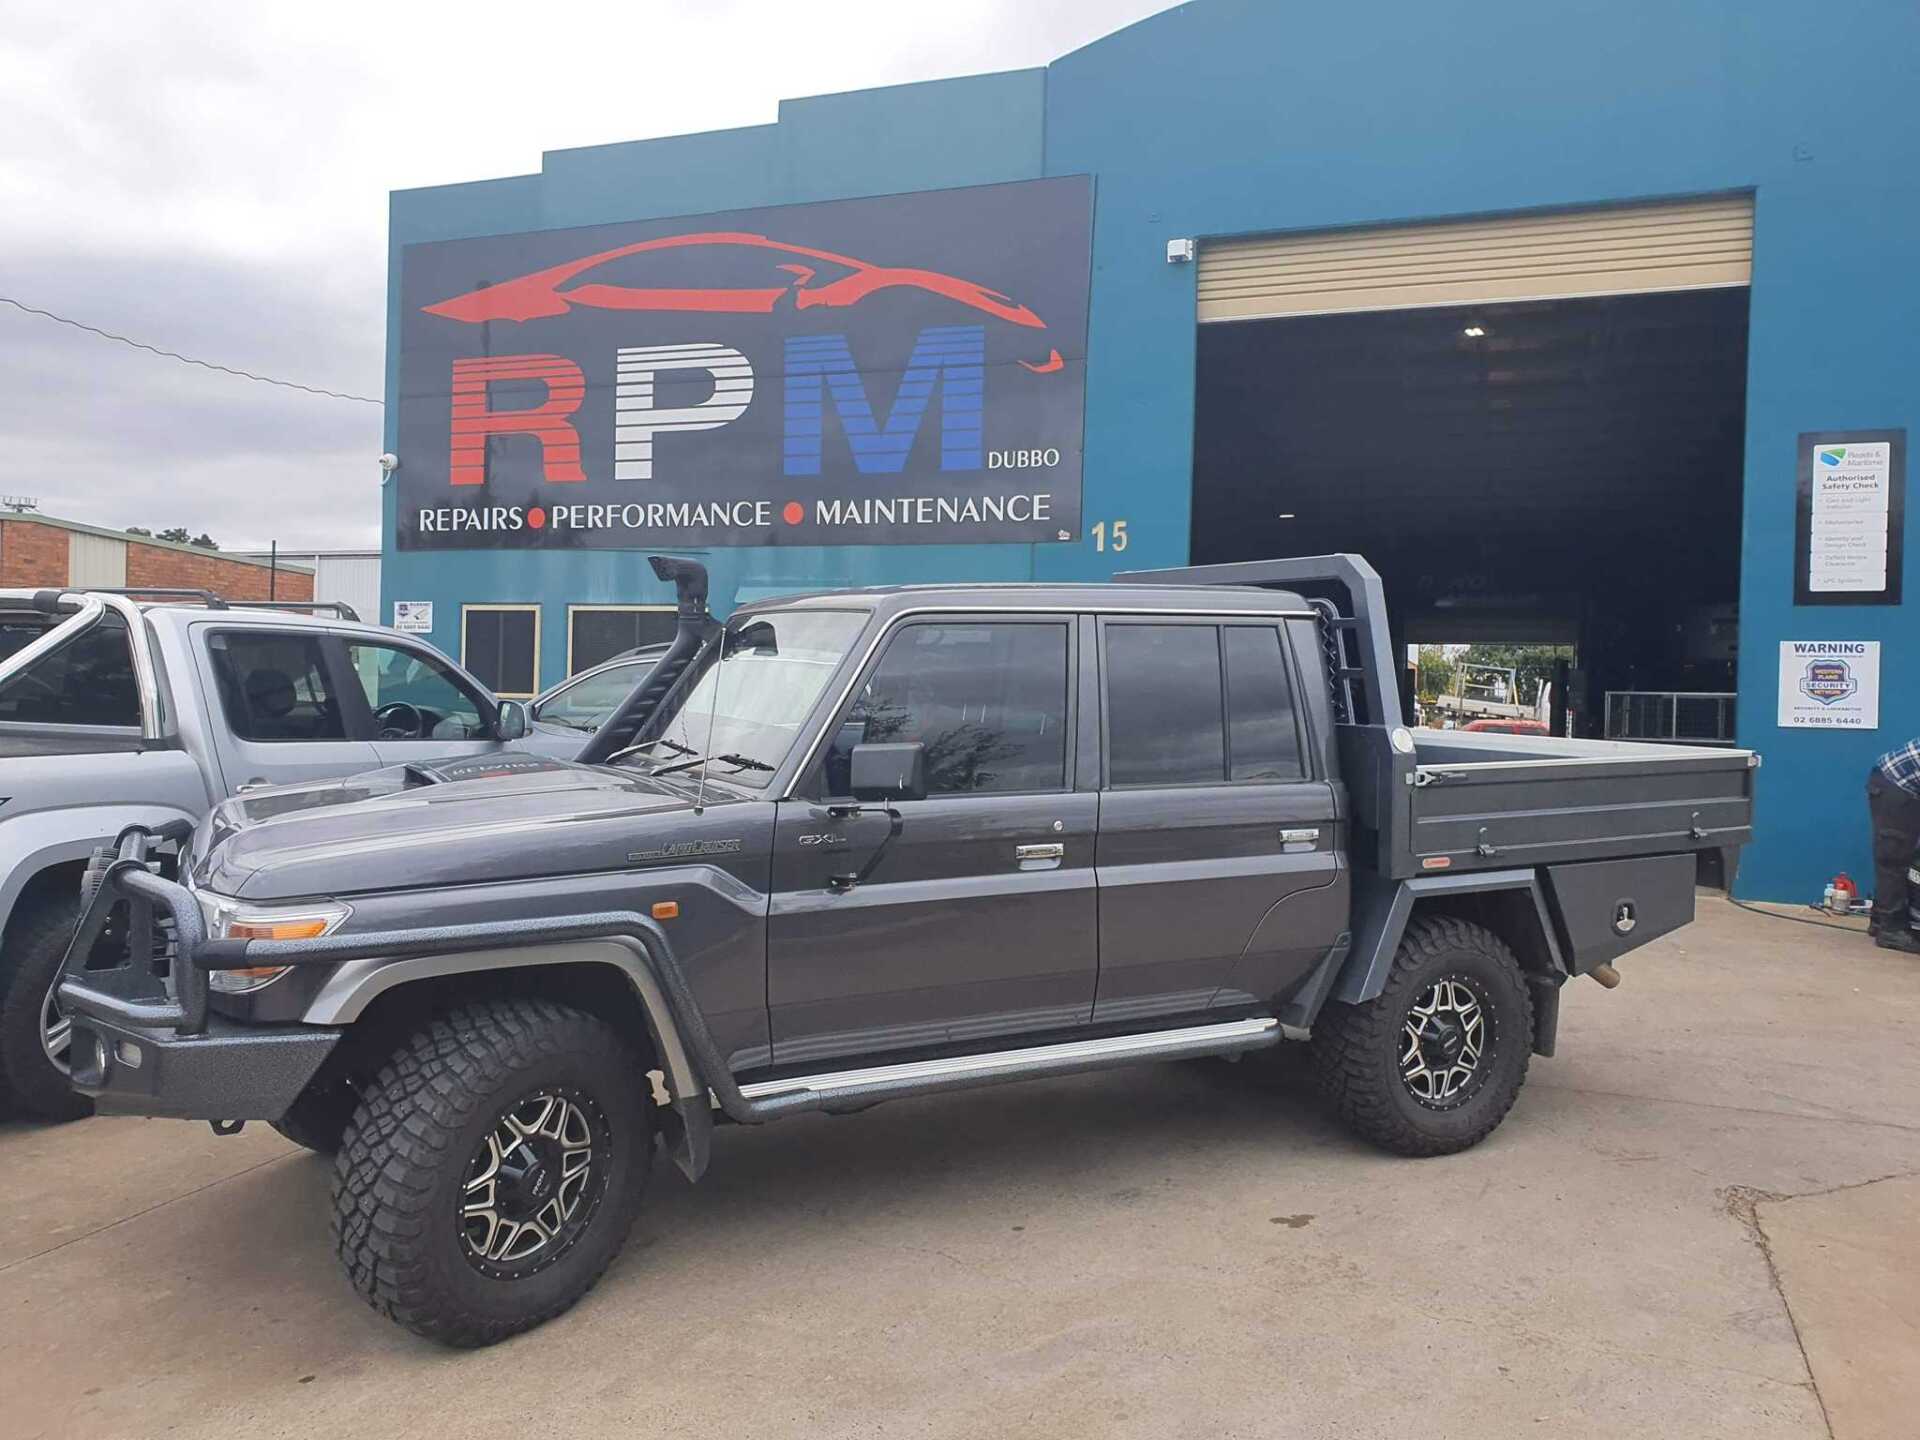 Large Dual Cab Grey Ute — Vehicle Servicing in Dubbo, NSW